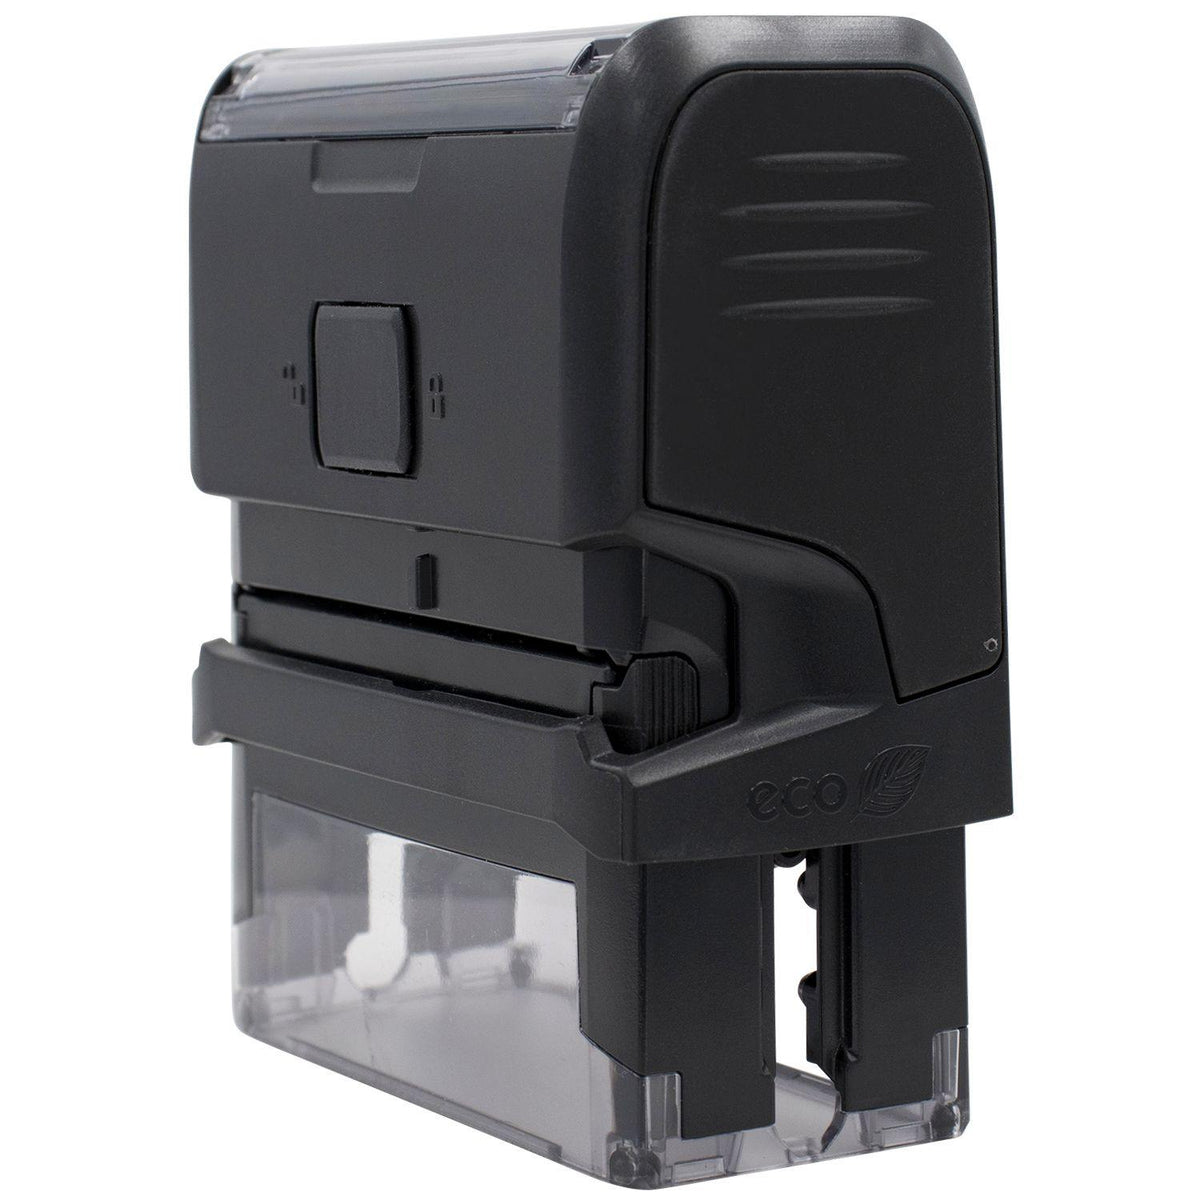 Self-Inking File with Envelope Stamp - Engineer Seal Stamps - Brand_Trodat, Impression Size_Small, Stamp Type_Self-Inking Stamp, Type of Use_General, Type of Use_Office